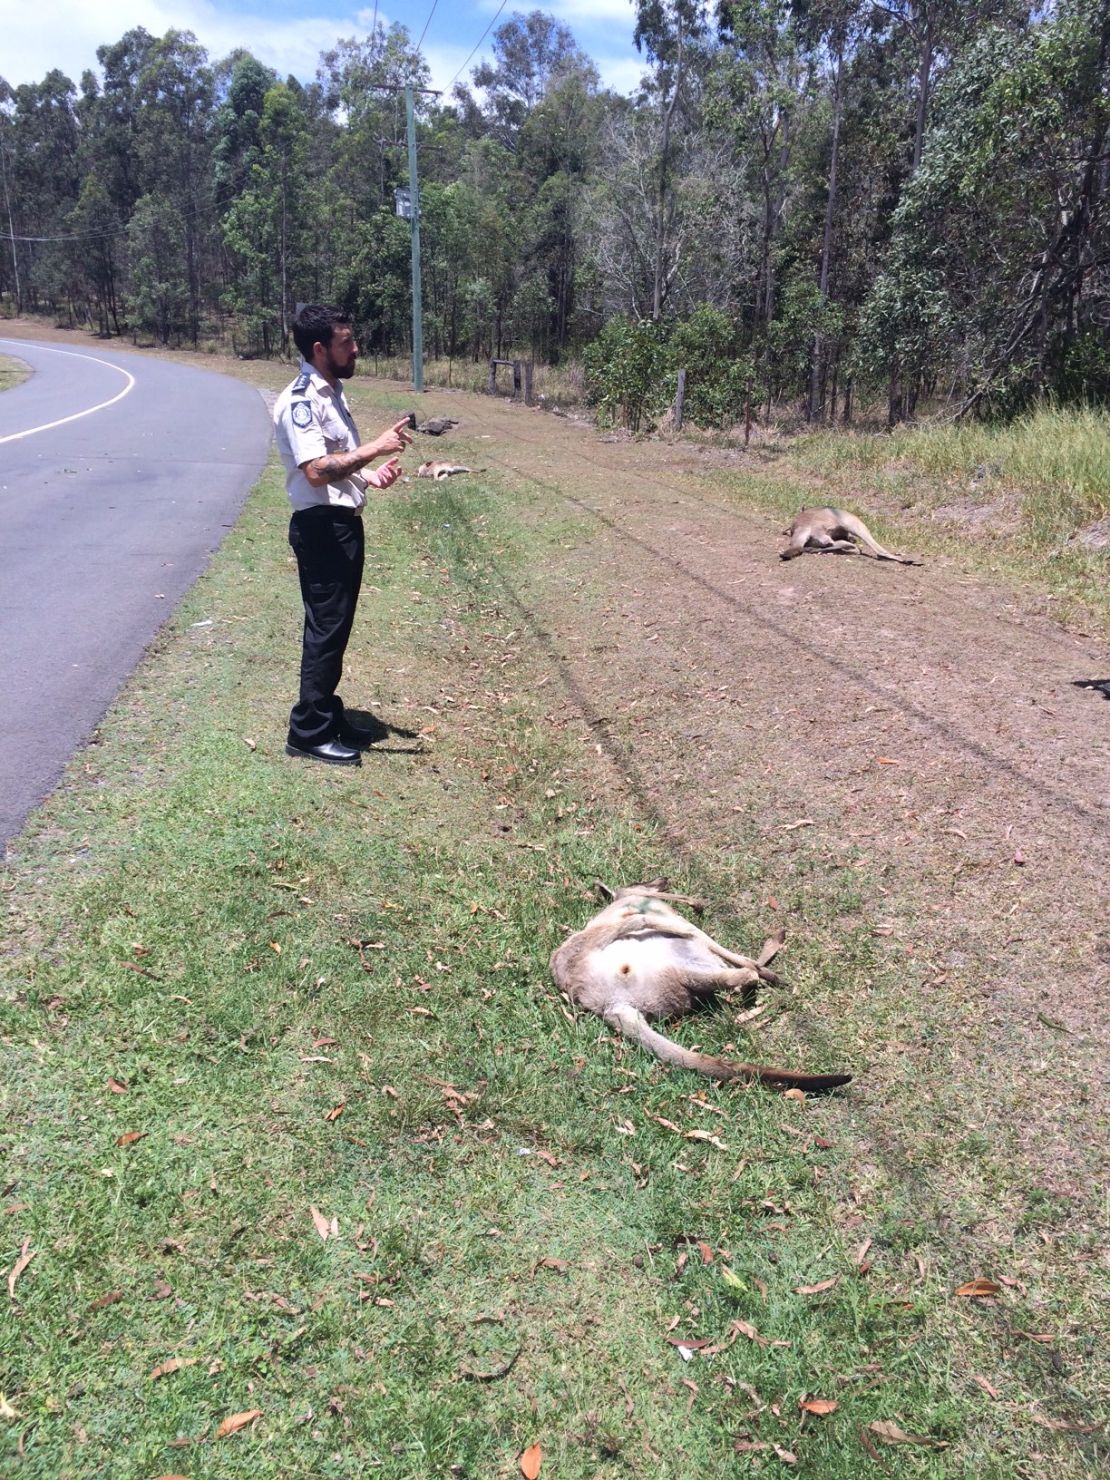 Tire marks show the driver swerved to hit kangaroos on both sides of the road.